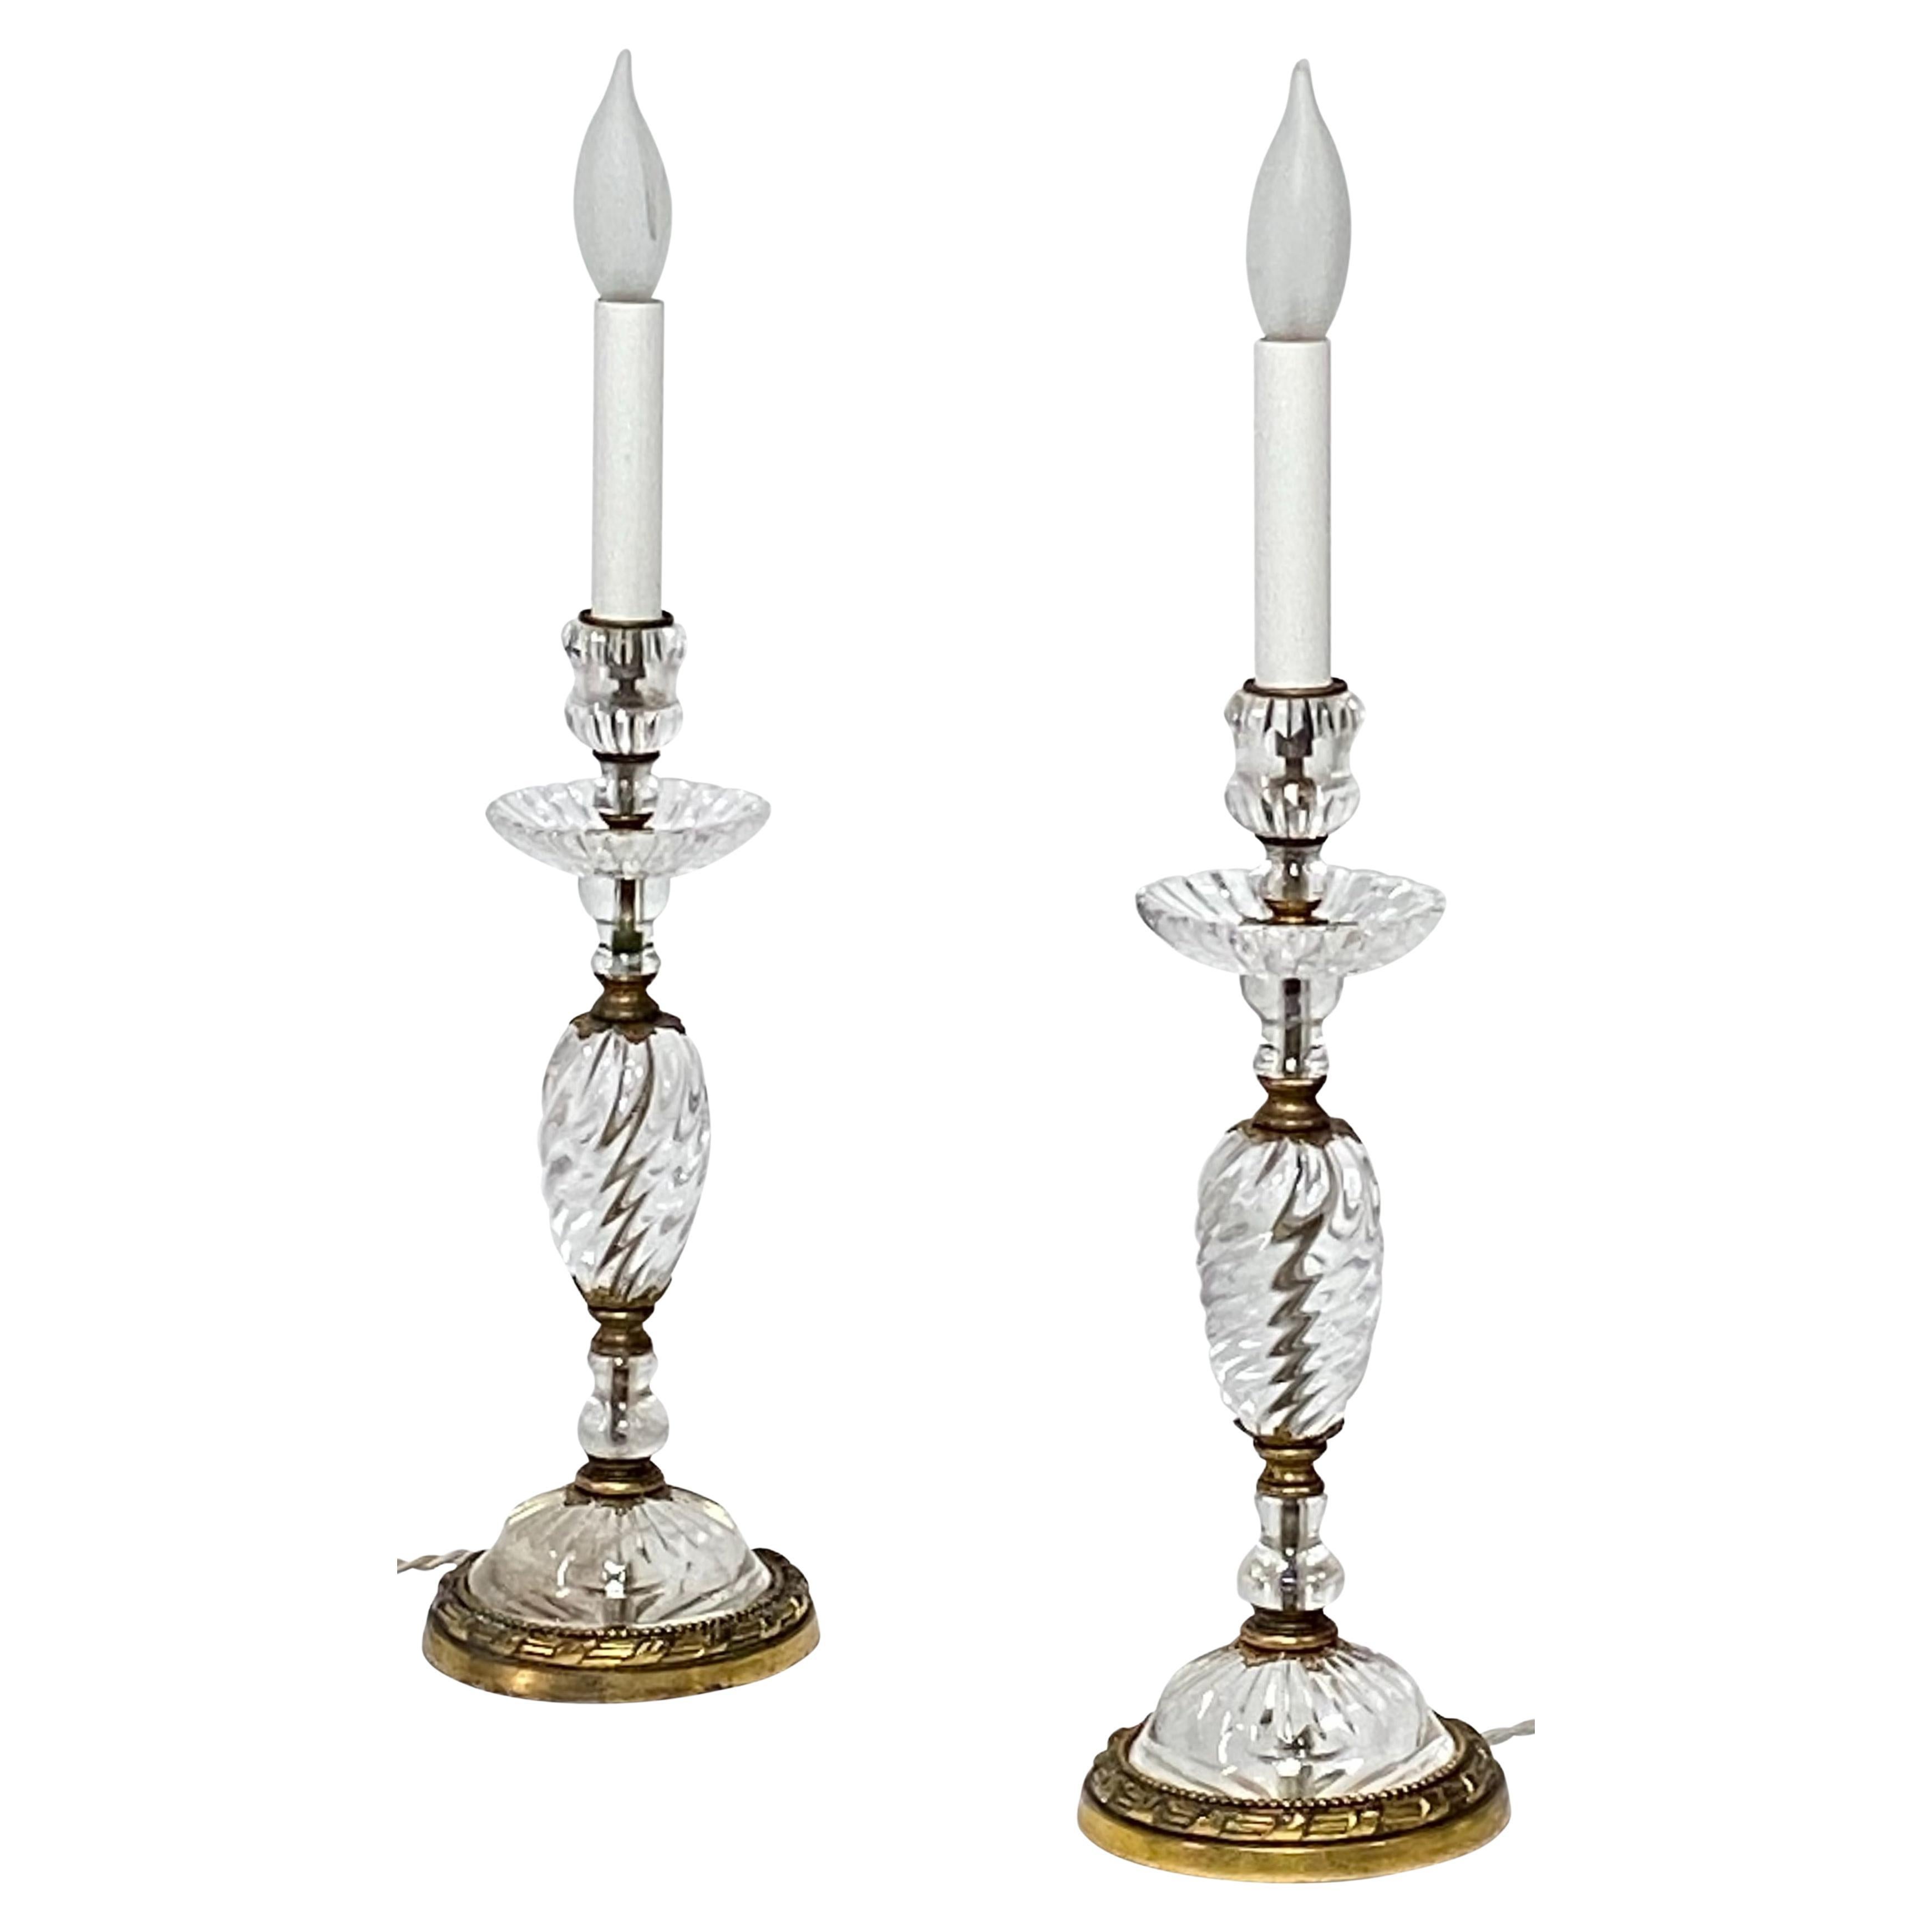 Pair of Early 19th Century French Rock Crystal Candle Stick Boudoir Lamps For Sale